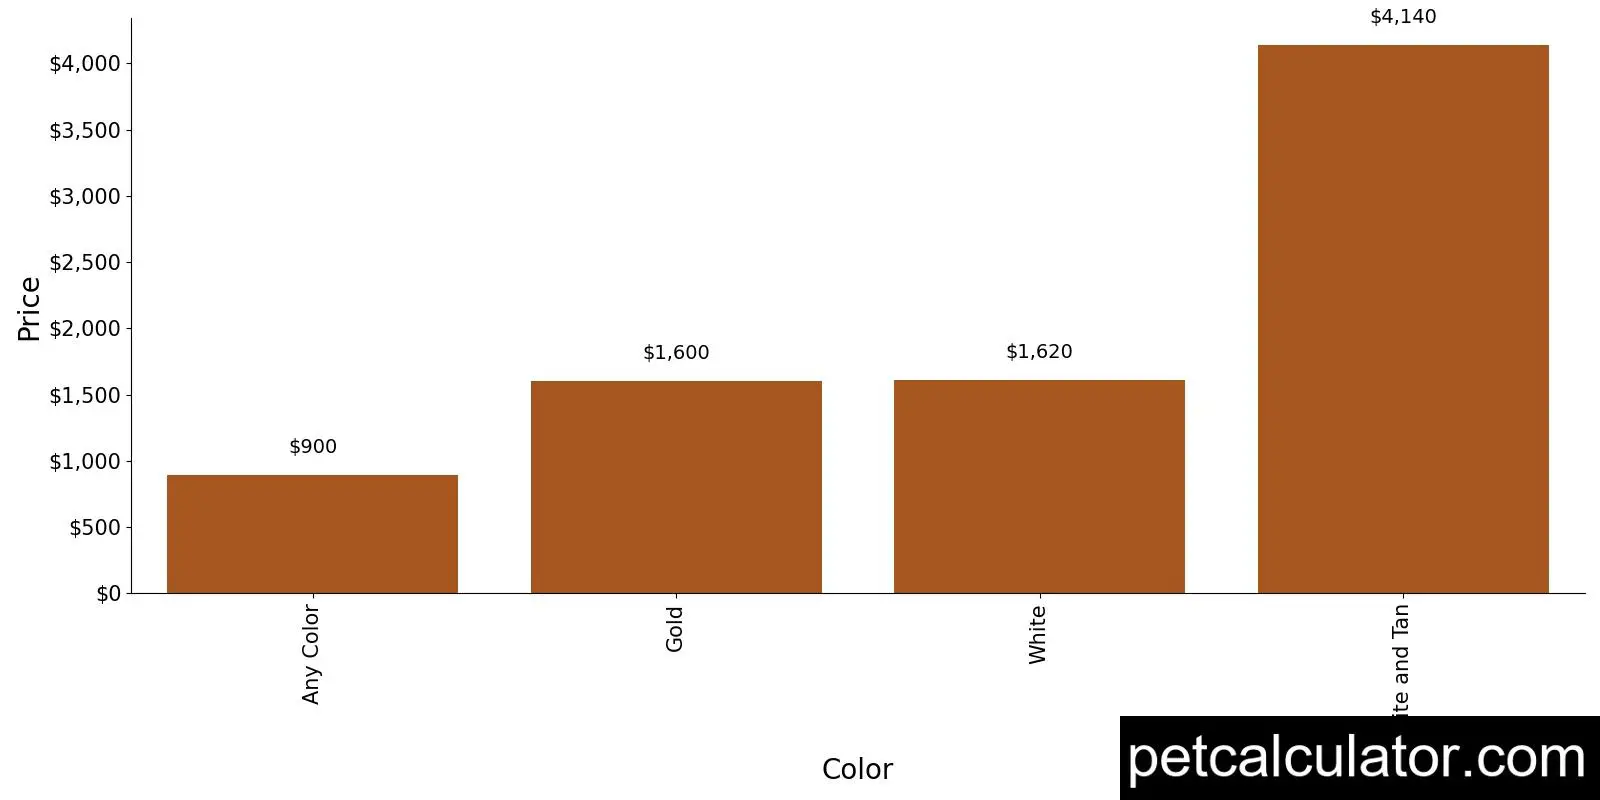 Price of Maremma Sheepdog by Color 